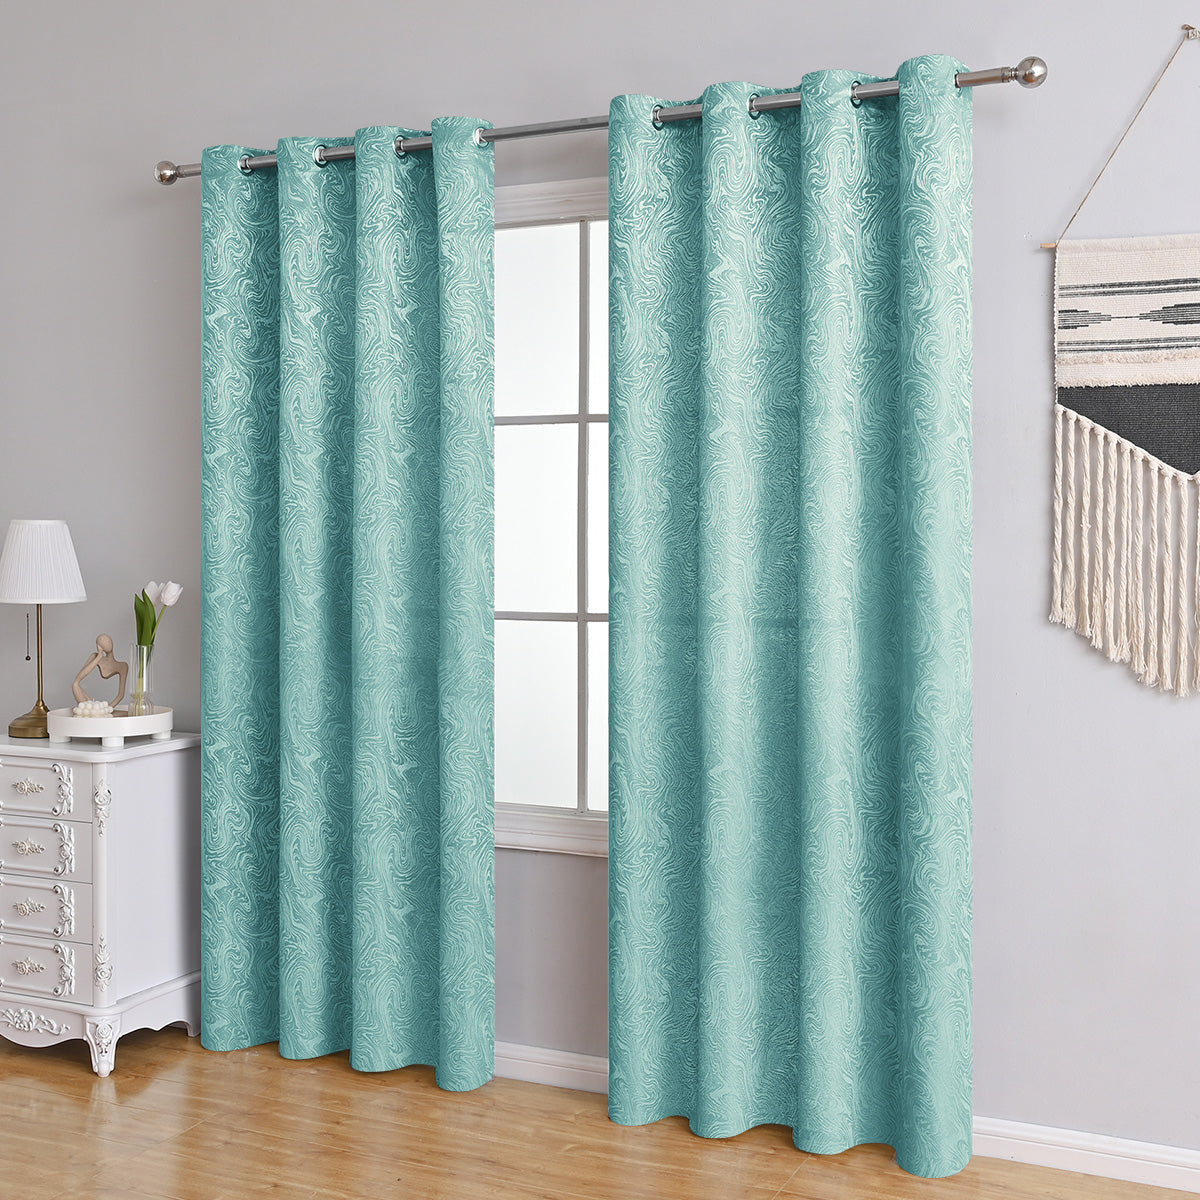 Modern Blackout Curtains Waves Textured, Gray/Blue/Green, Living Room